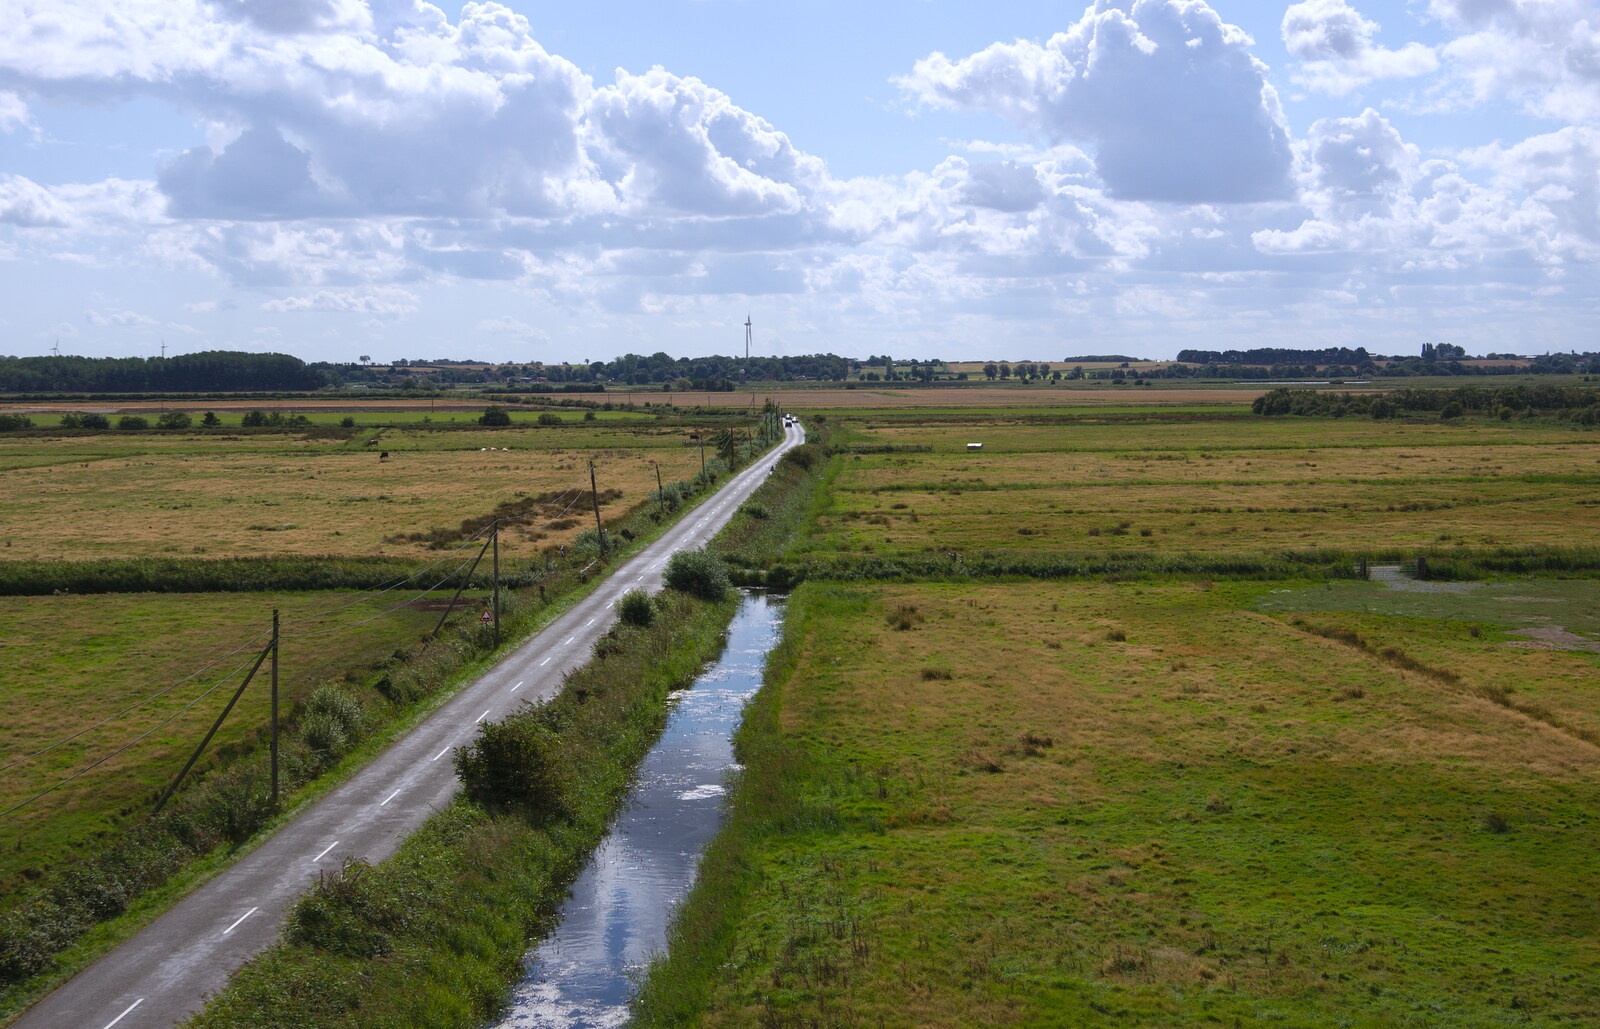 The road back to Martham from Waxham Sands and the Nelson Head Beer Festival, Horsey, Norfolk - 31st August 2019